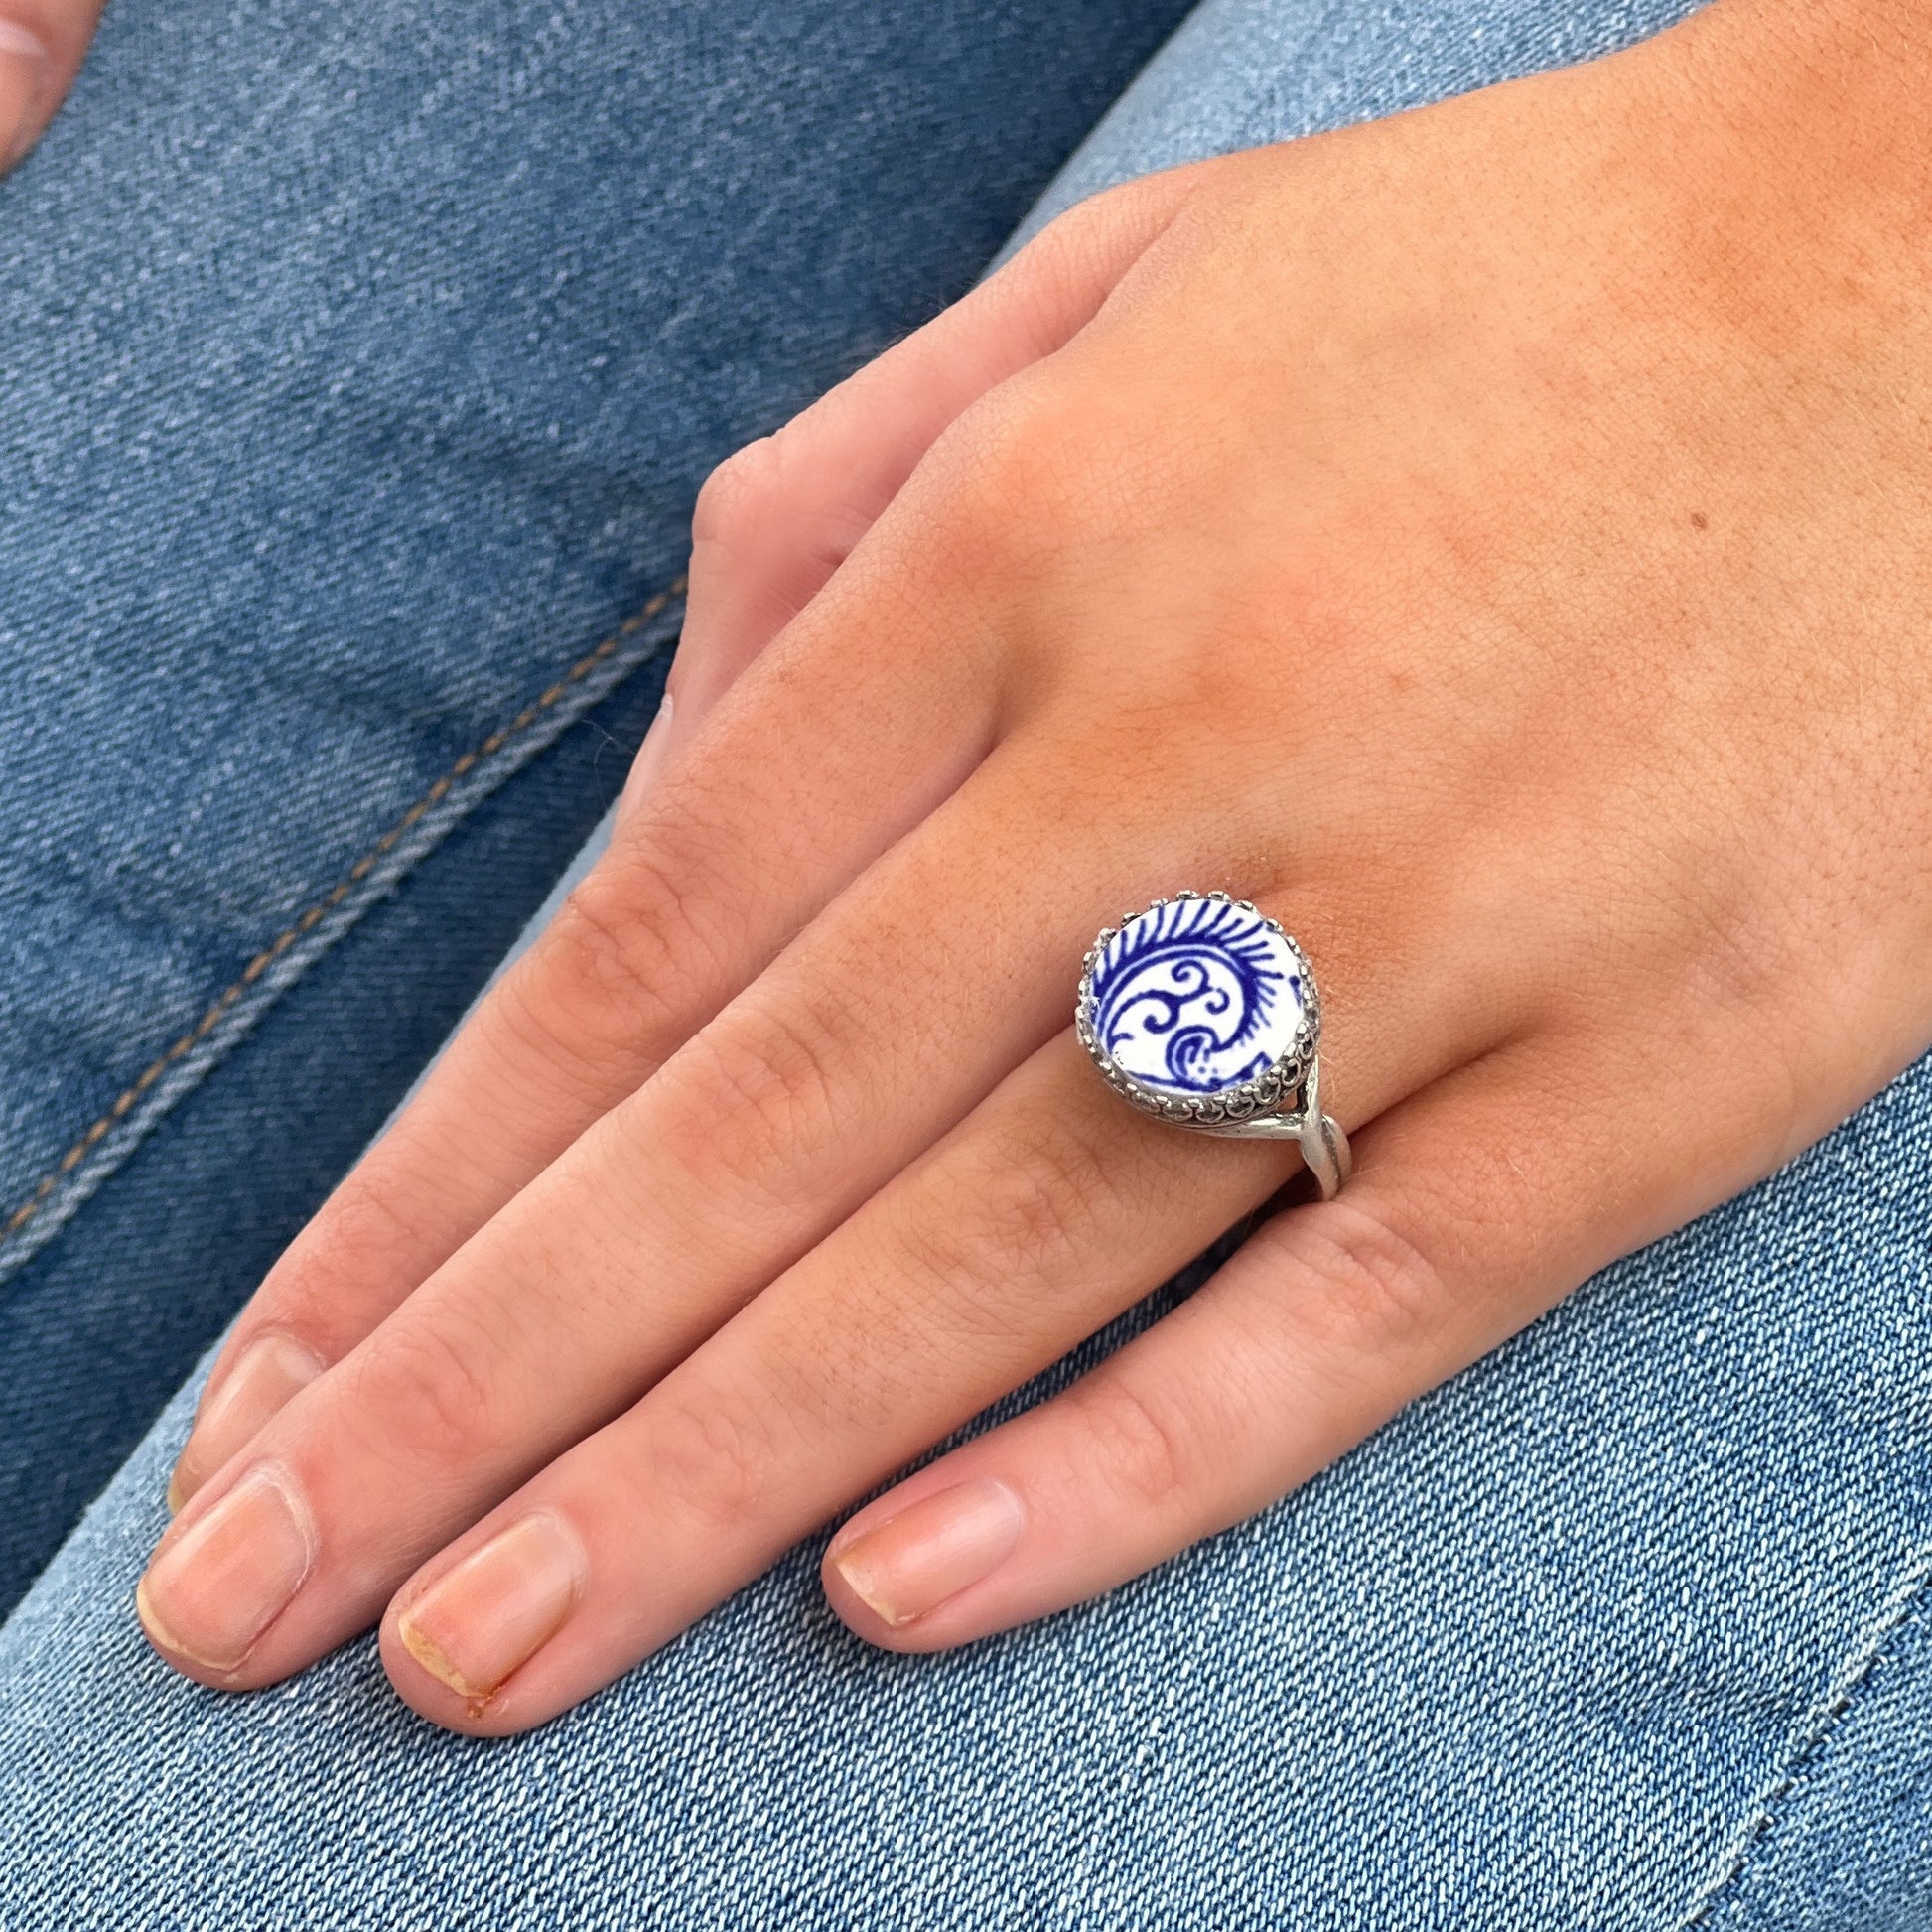 Blue Willow Ware Broken China Jewelry Ring, Sterling Silver Adjustable Ring, Gifts for Women,